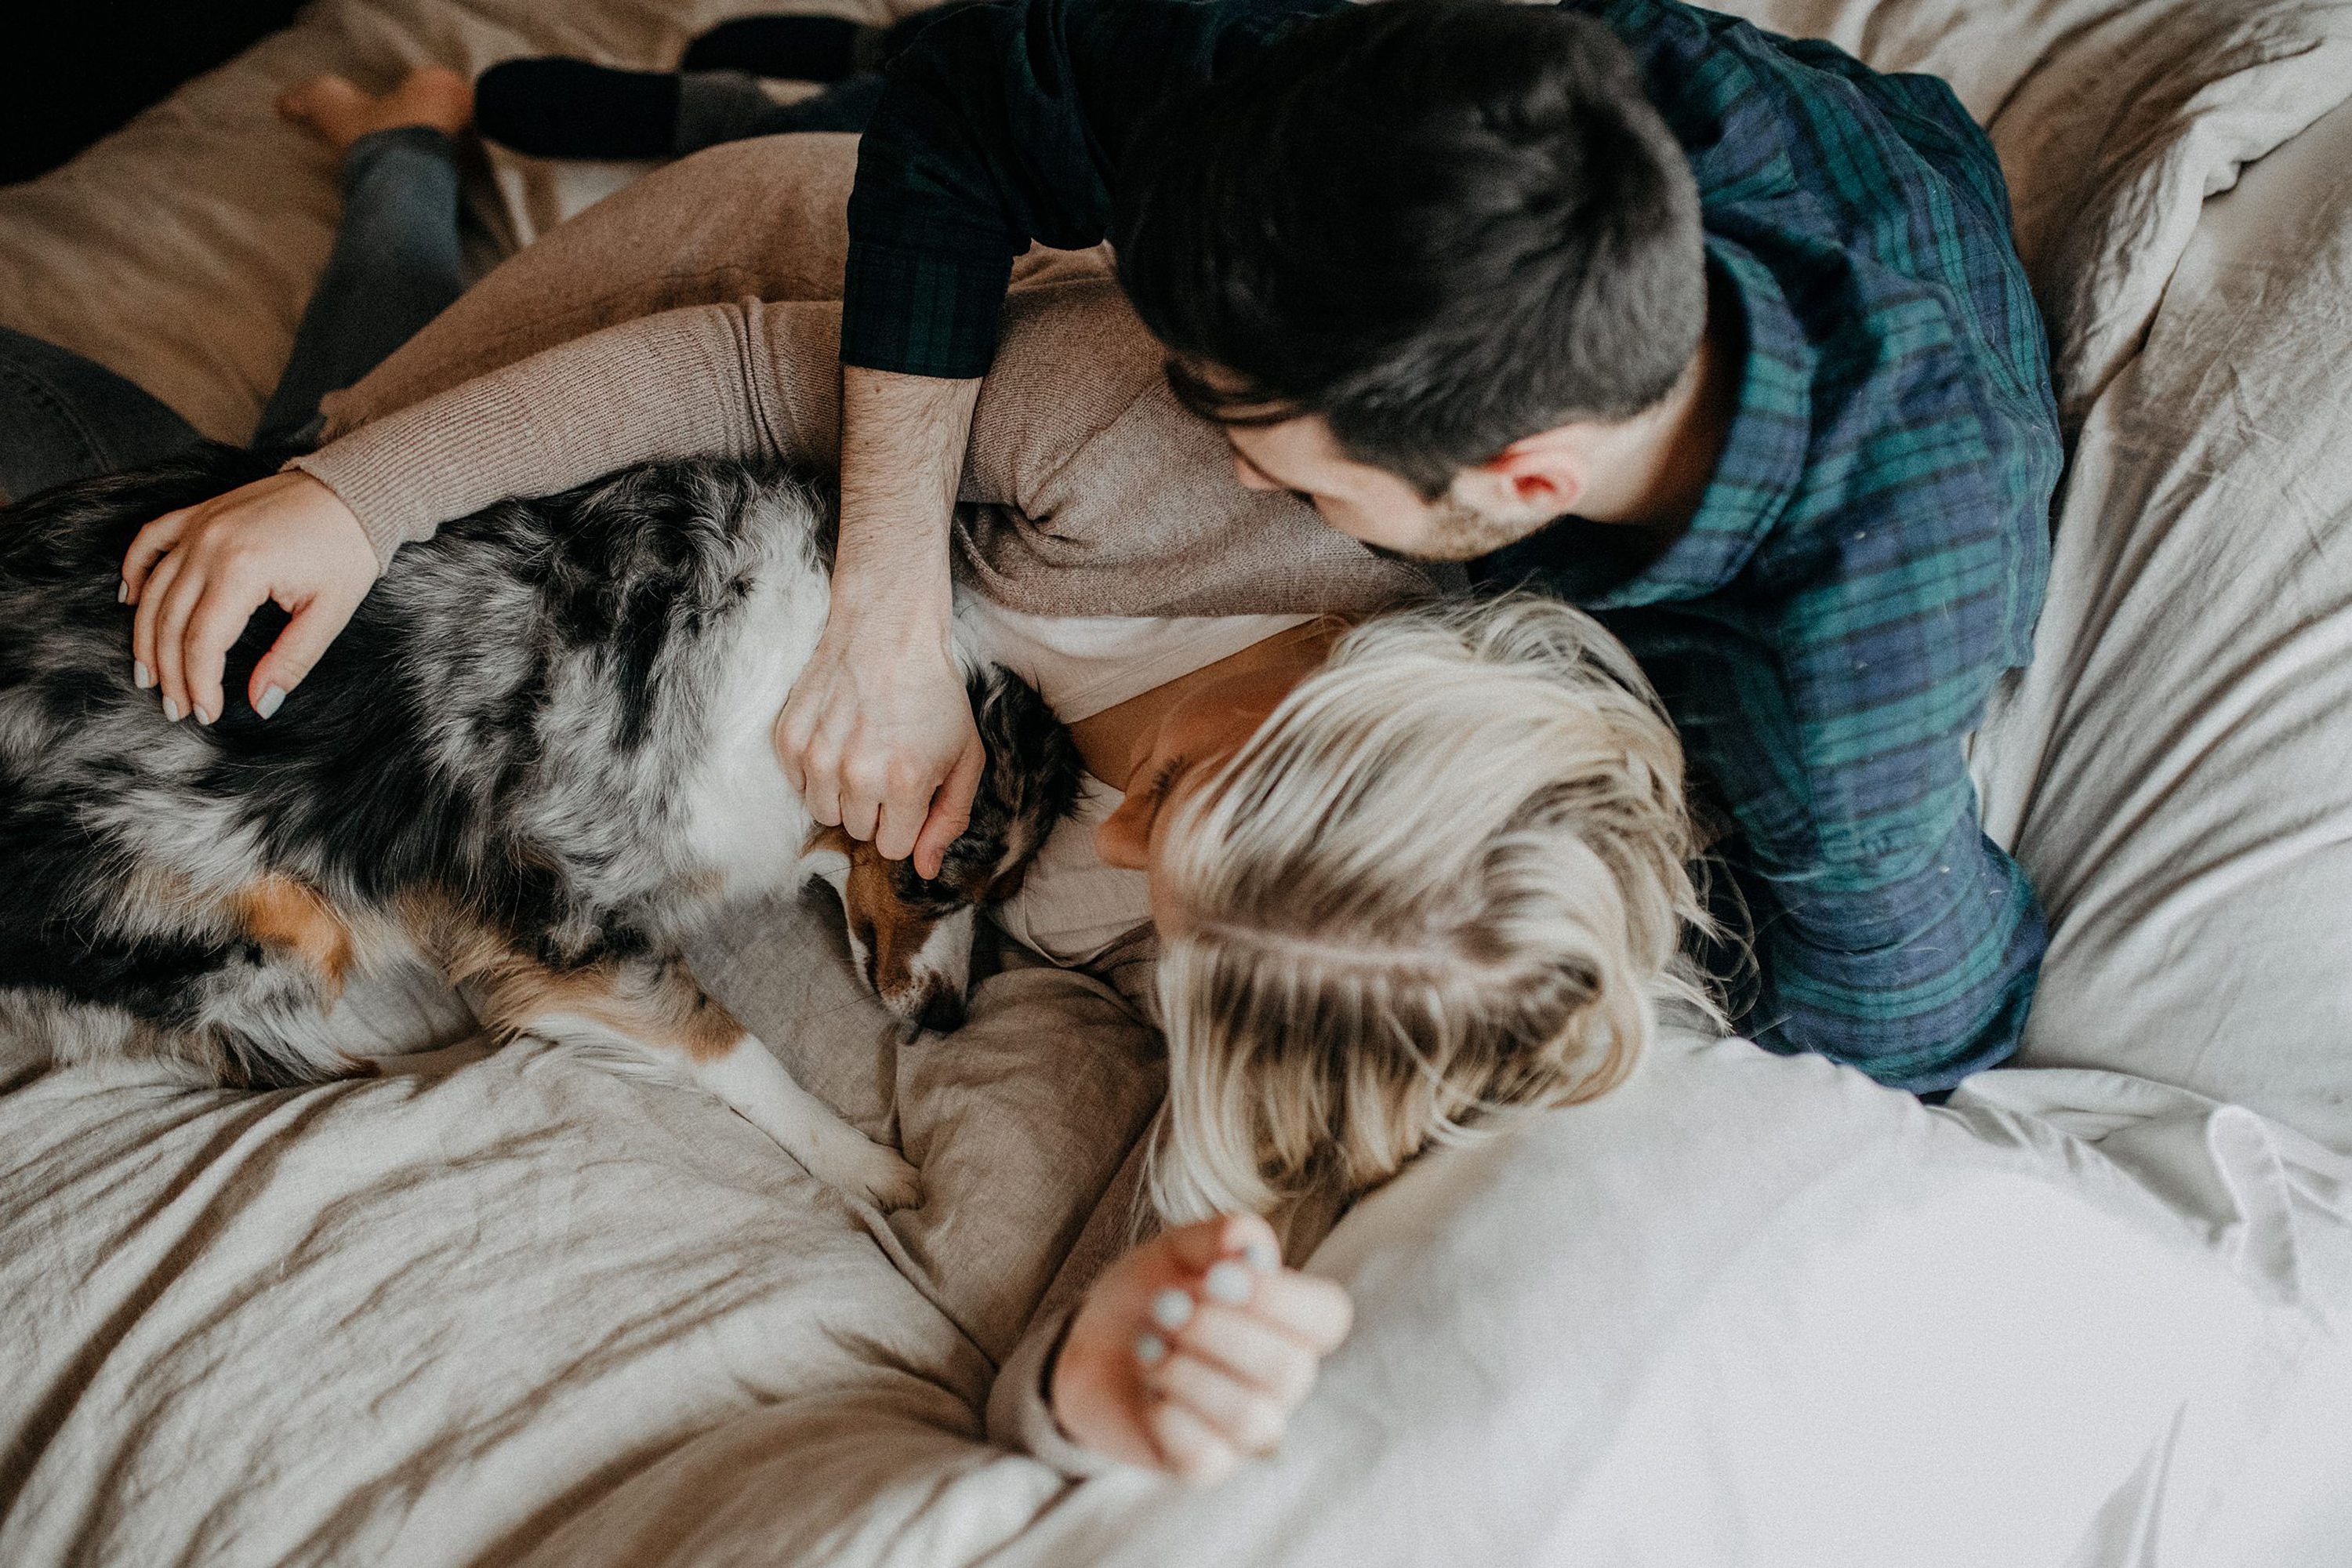 cute couples photos,in home engagement session,candid engagement session,winter engagement session,living room engagement session,engagement photos with dog,couples photos with dog